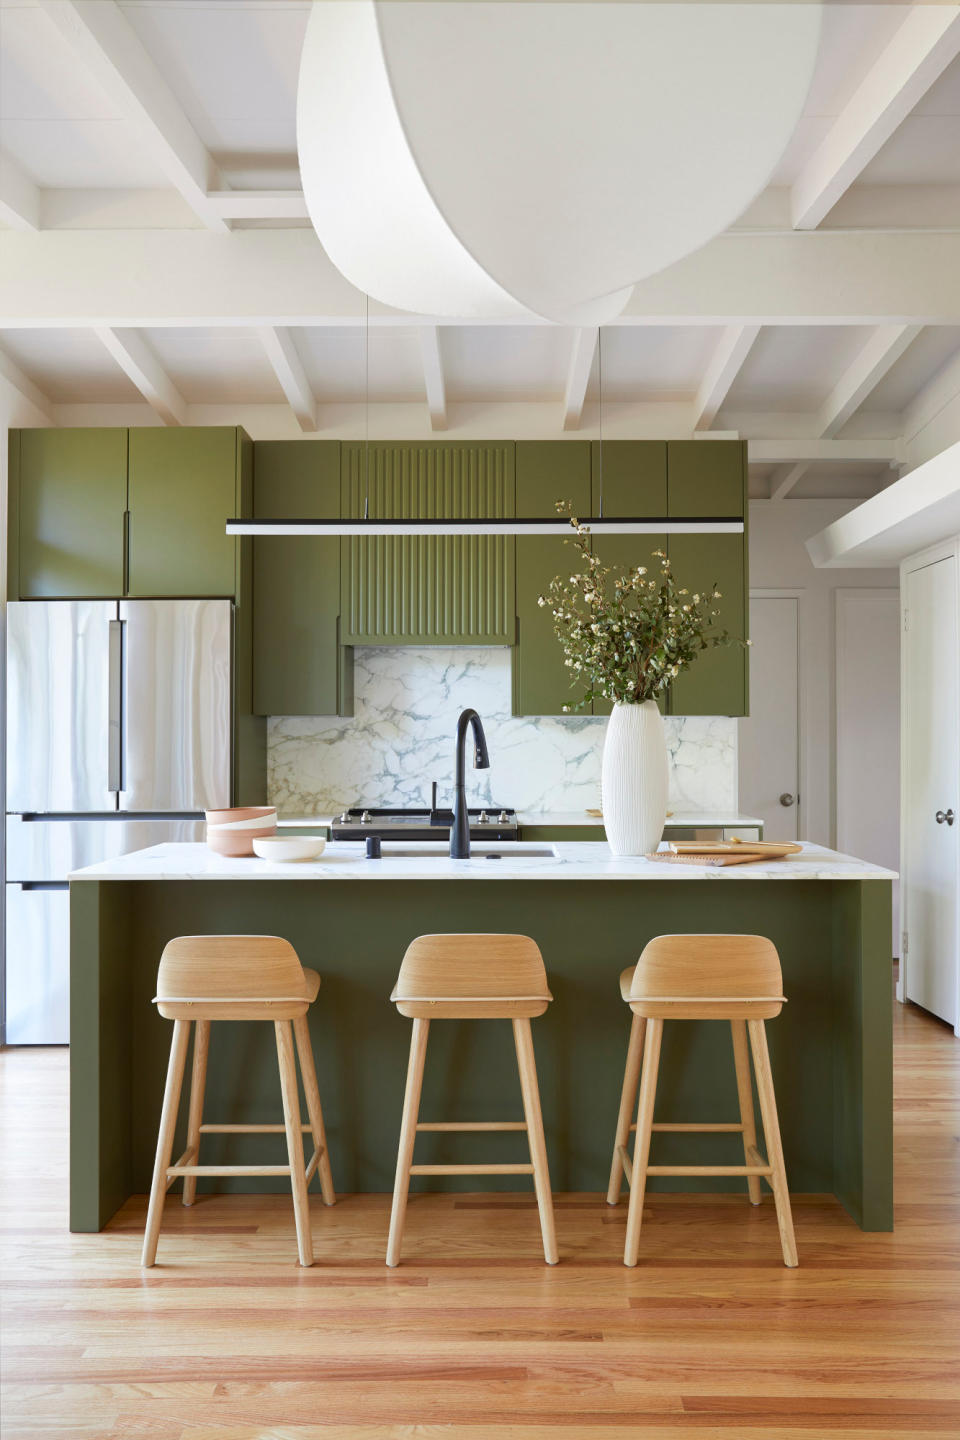 Simple green kitchen with wooden bar stools